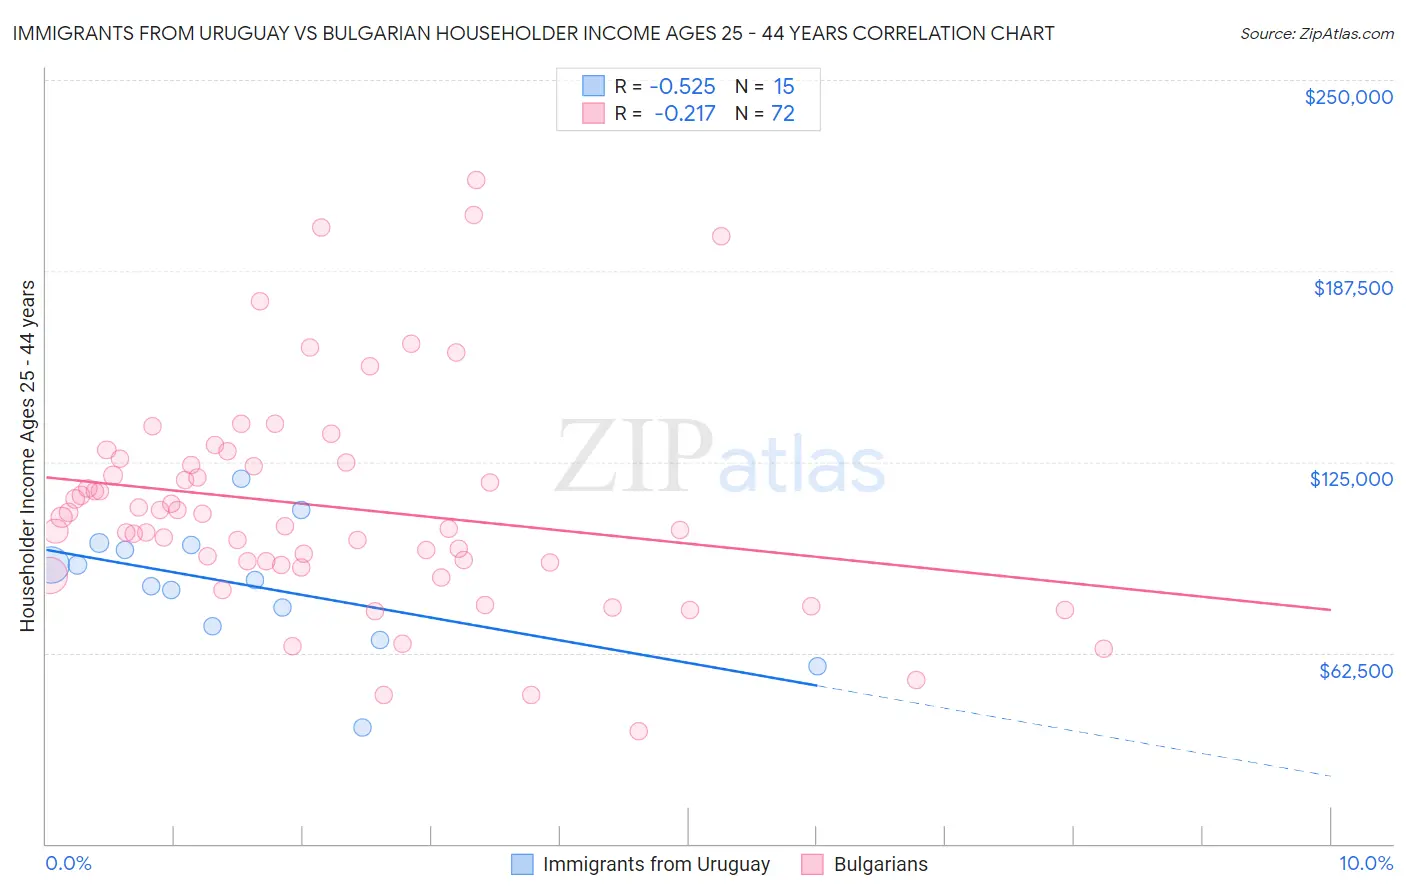 Immigrants from Uruguay vs Bulgarian Householder Income Ages 25 - 44 years